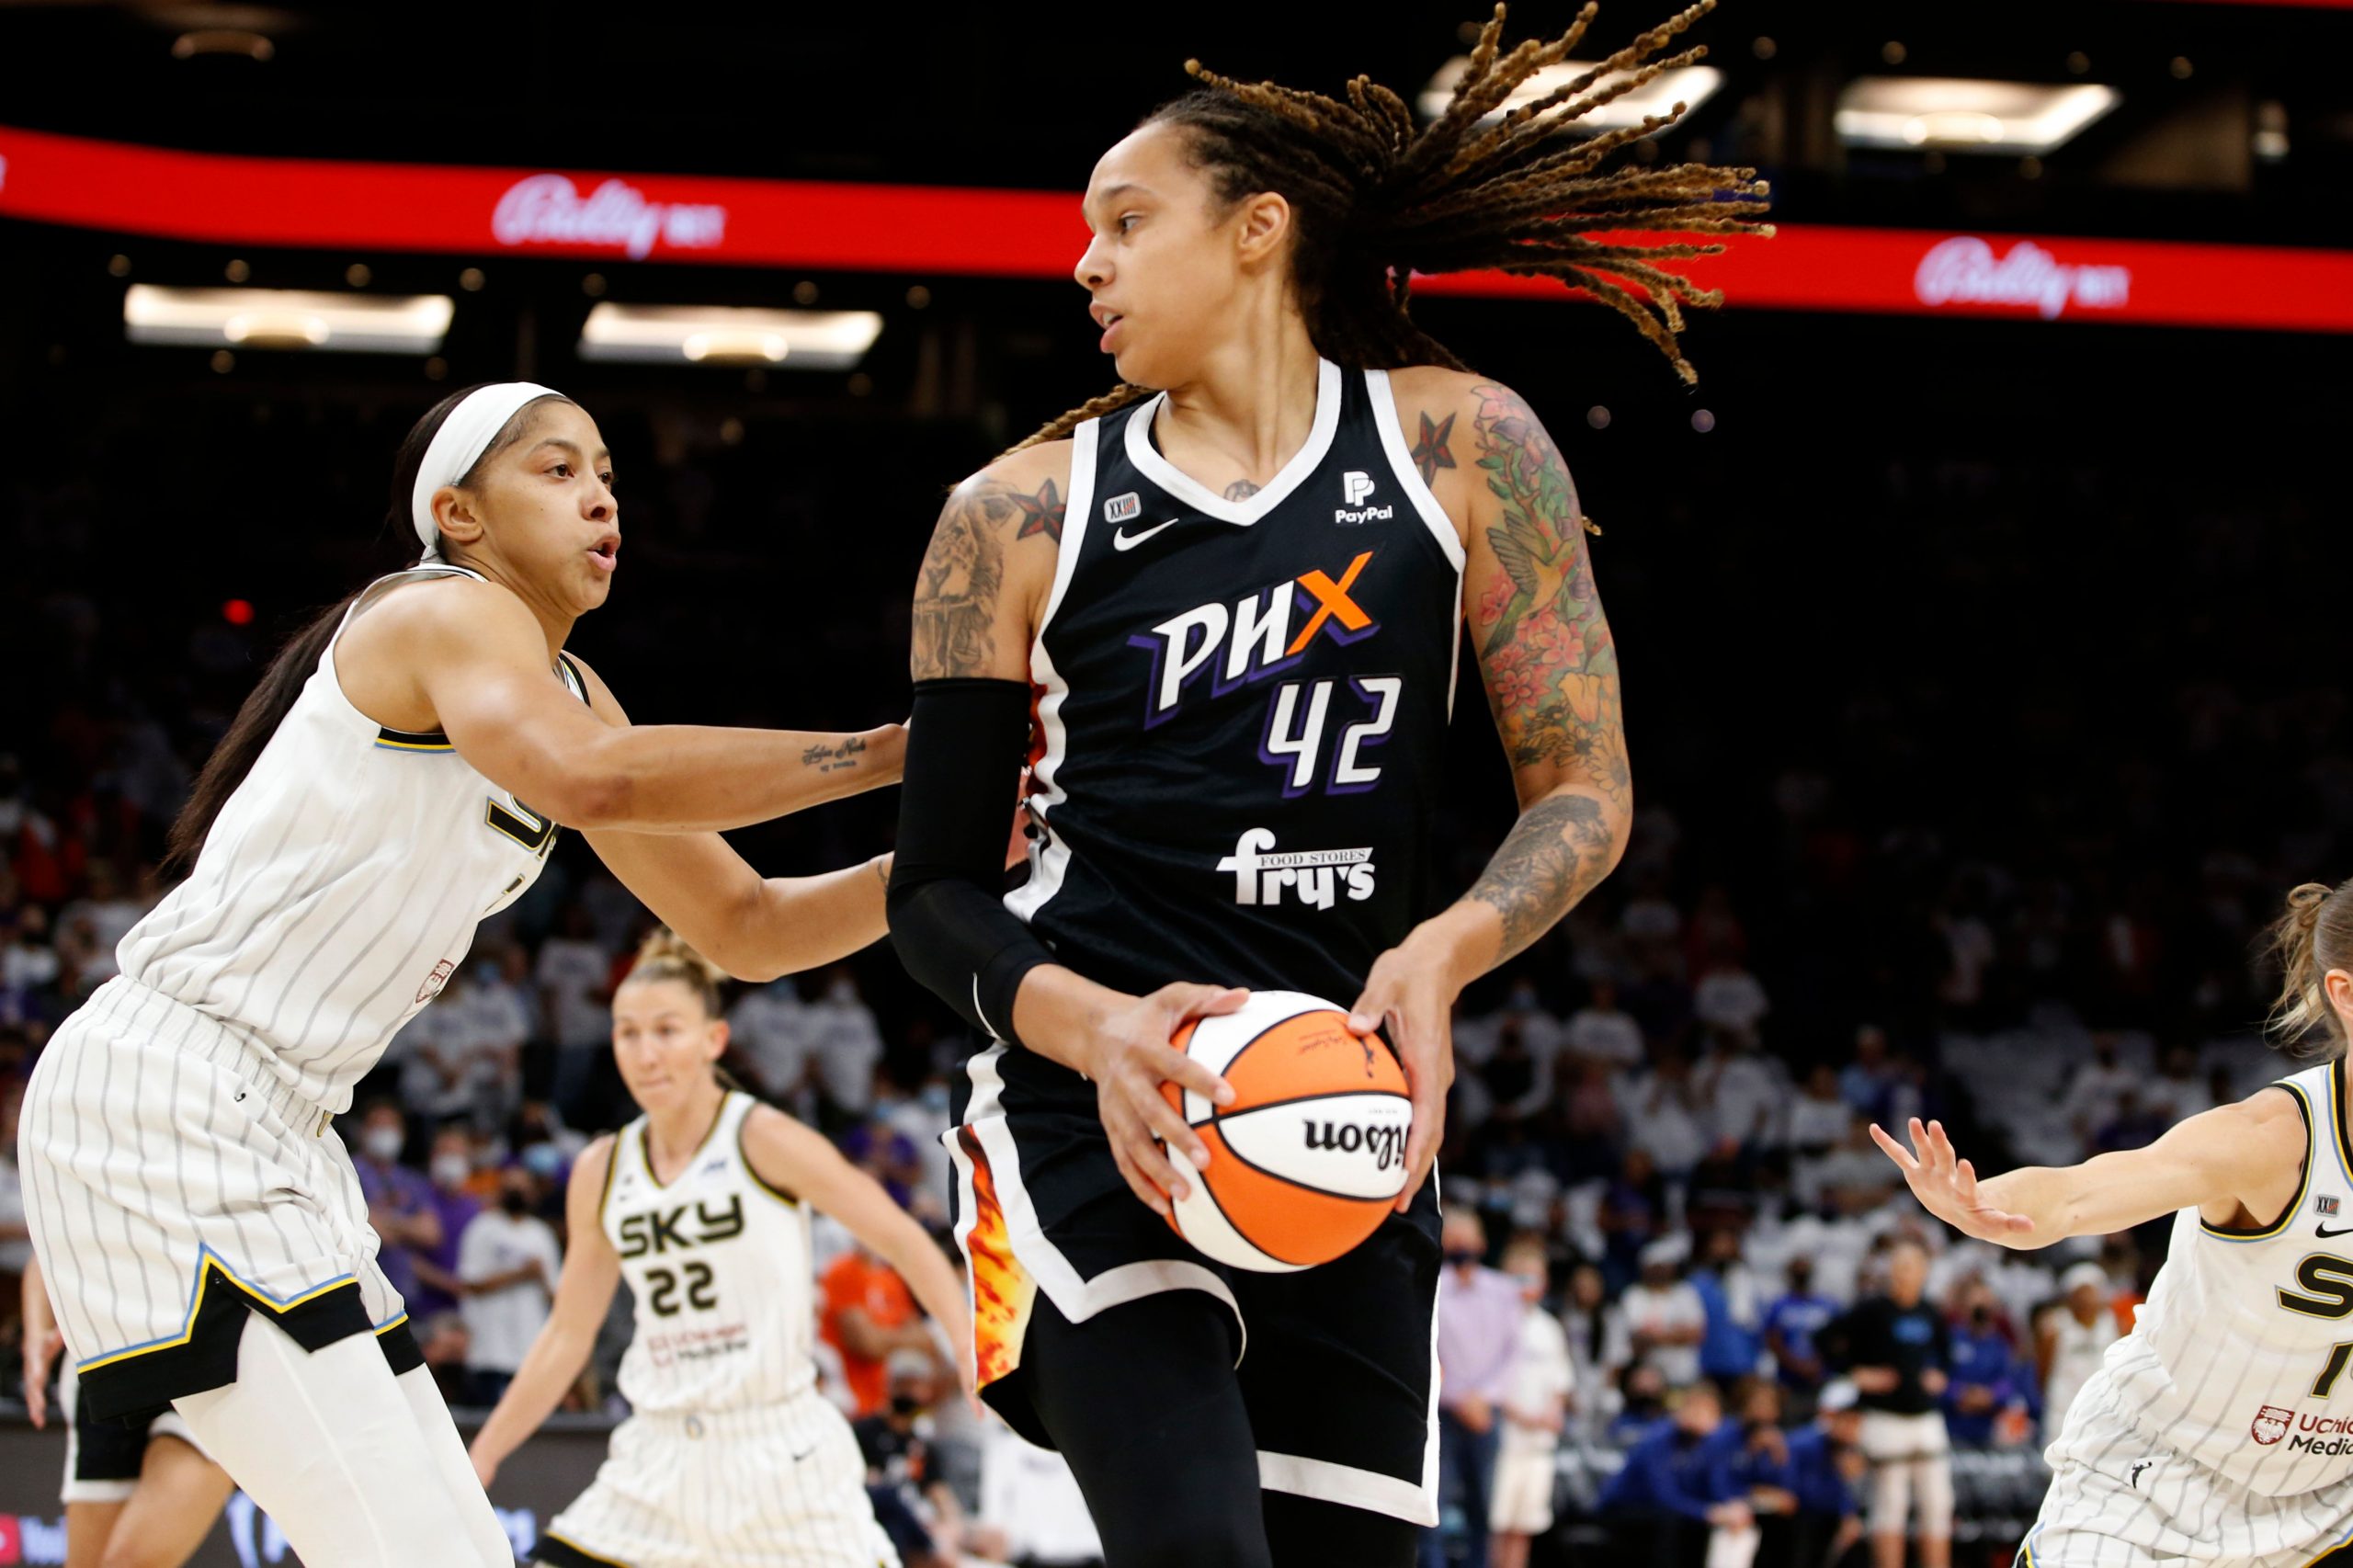 WNBA star Brittney Griner’s drug-related detention in Russia extended